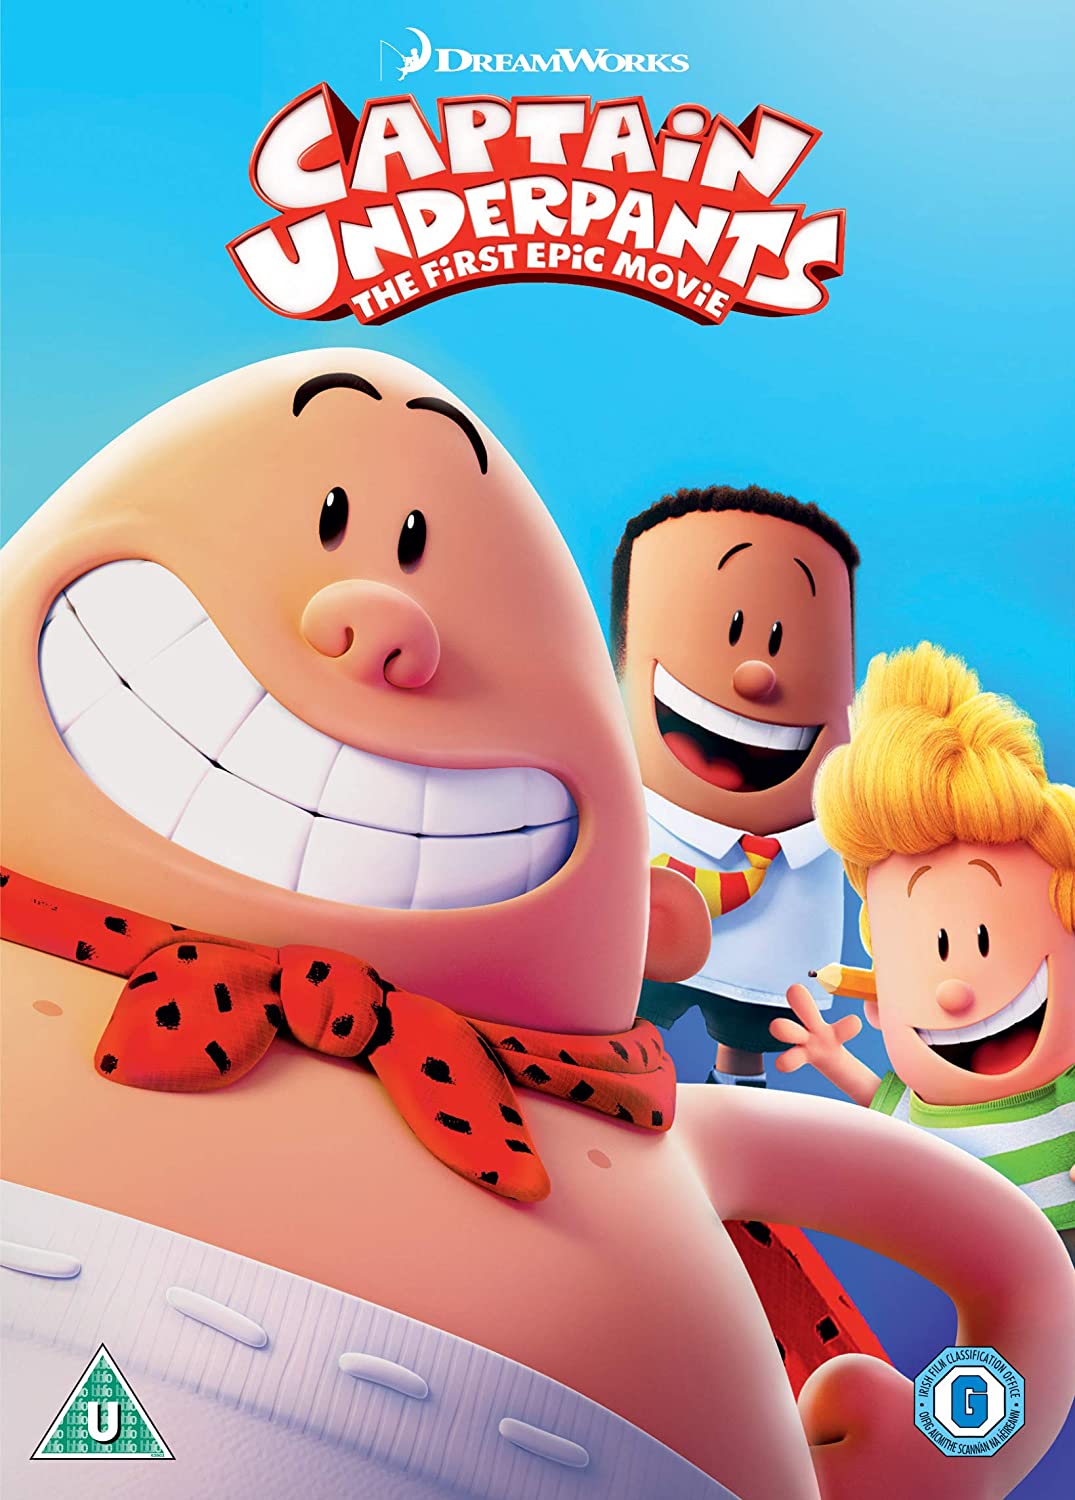 Captain Underpants: The First Epic Movie [2017] (Dreamworks) (DVD)